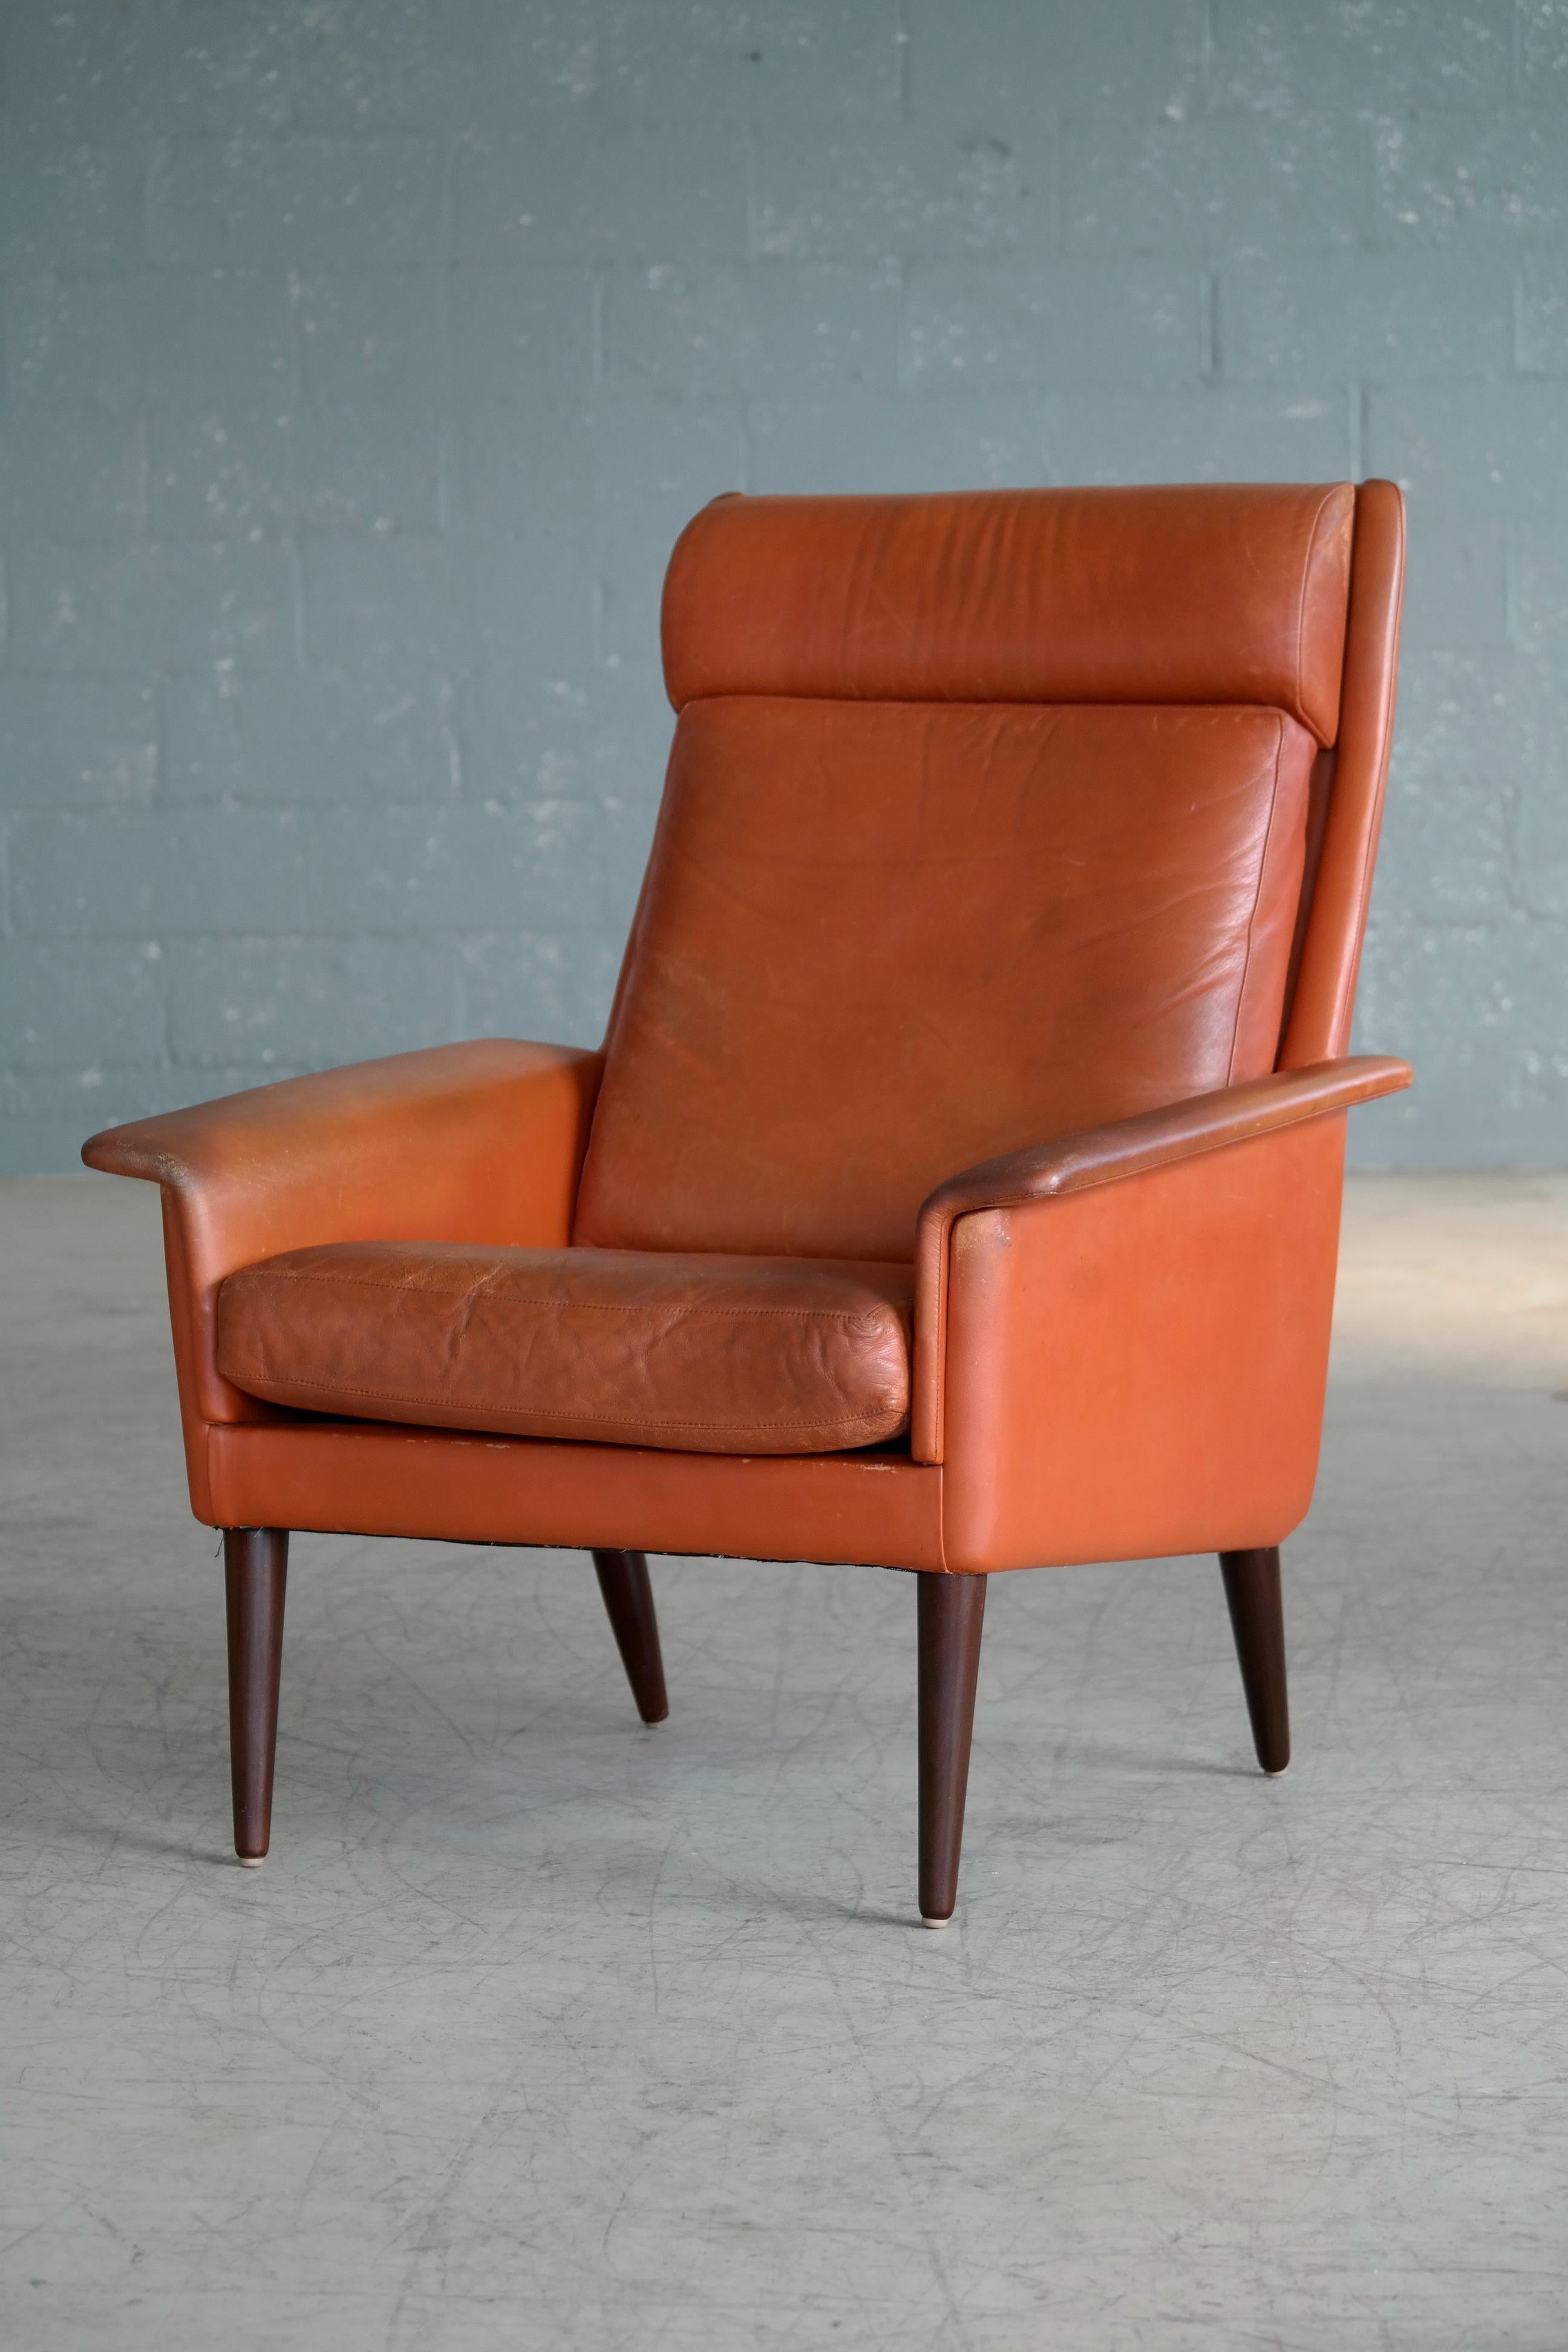 Sleek and very cool Danish 1960s cognac colored high back lounge chair carrying the makers label of Sibast furniture on the bottom frame. The chairs is very much in the style of Arne Vodder who did design for Sibast and it's very similar to design